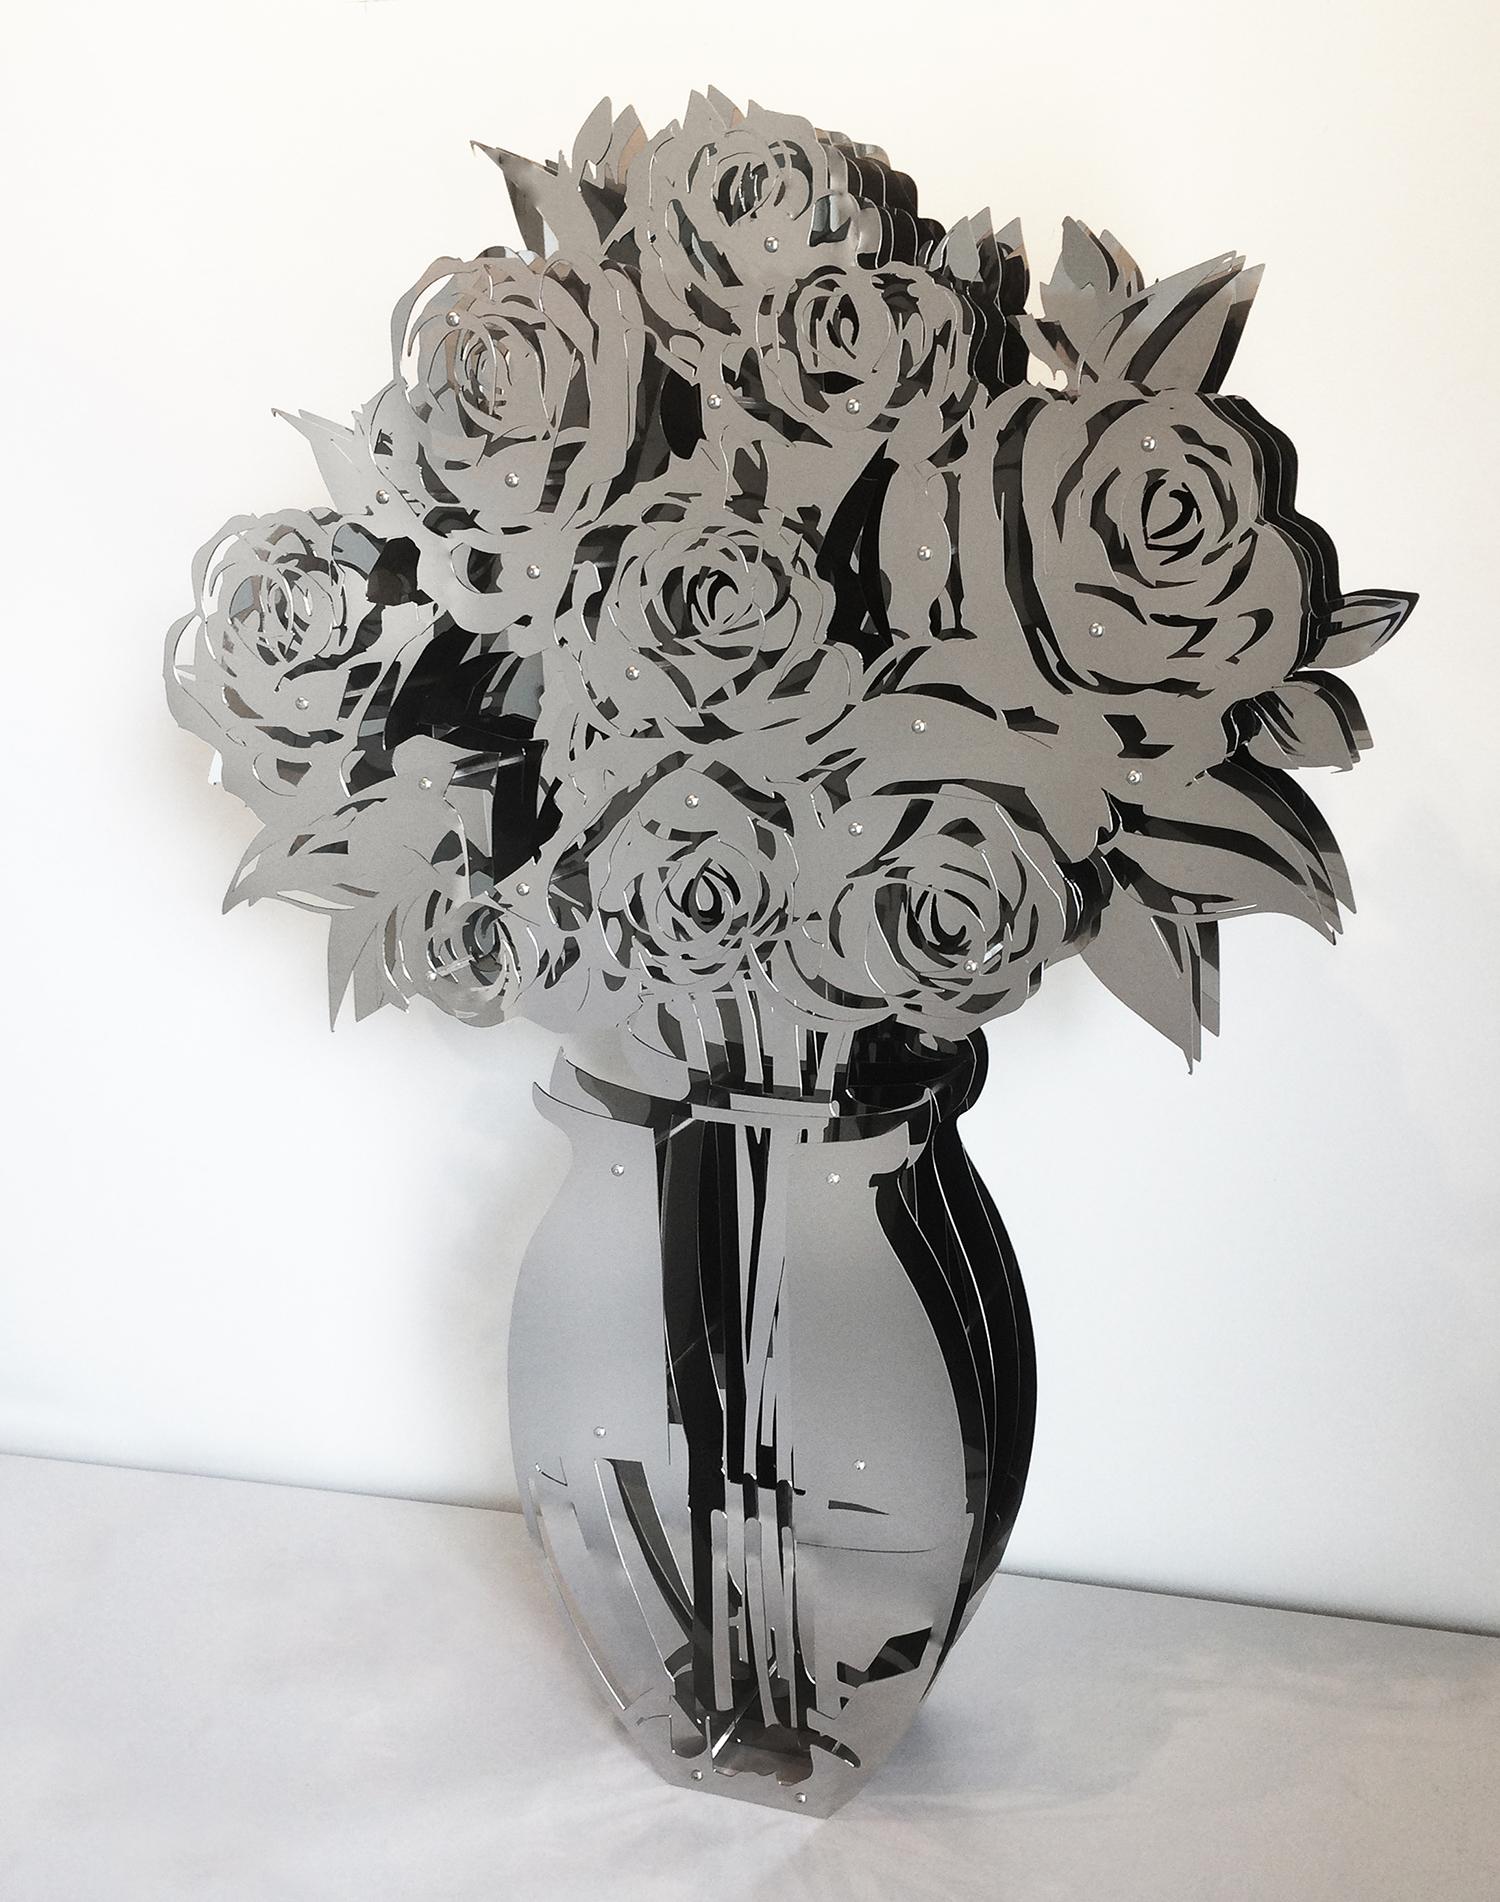 Michael Kalish Still-Life Sculpture - Vase of Roses - Mirrored Stainless 42